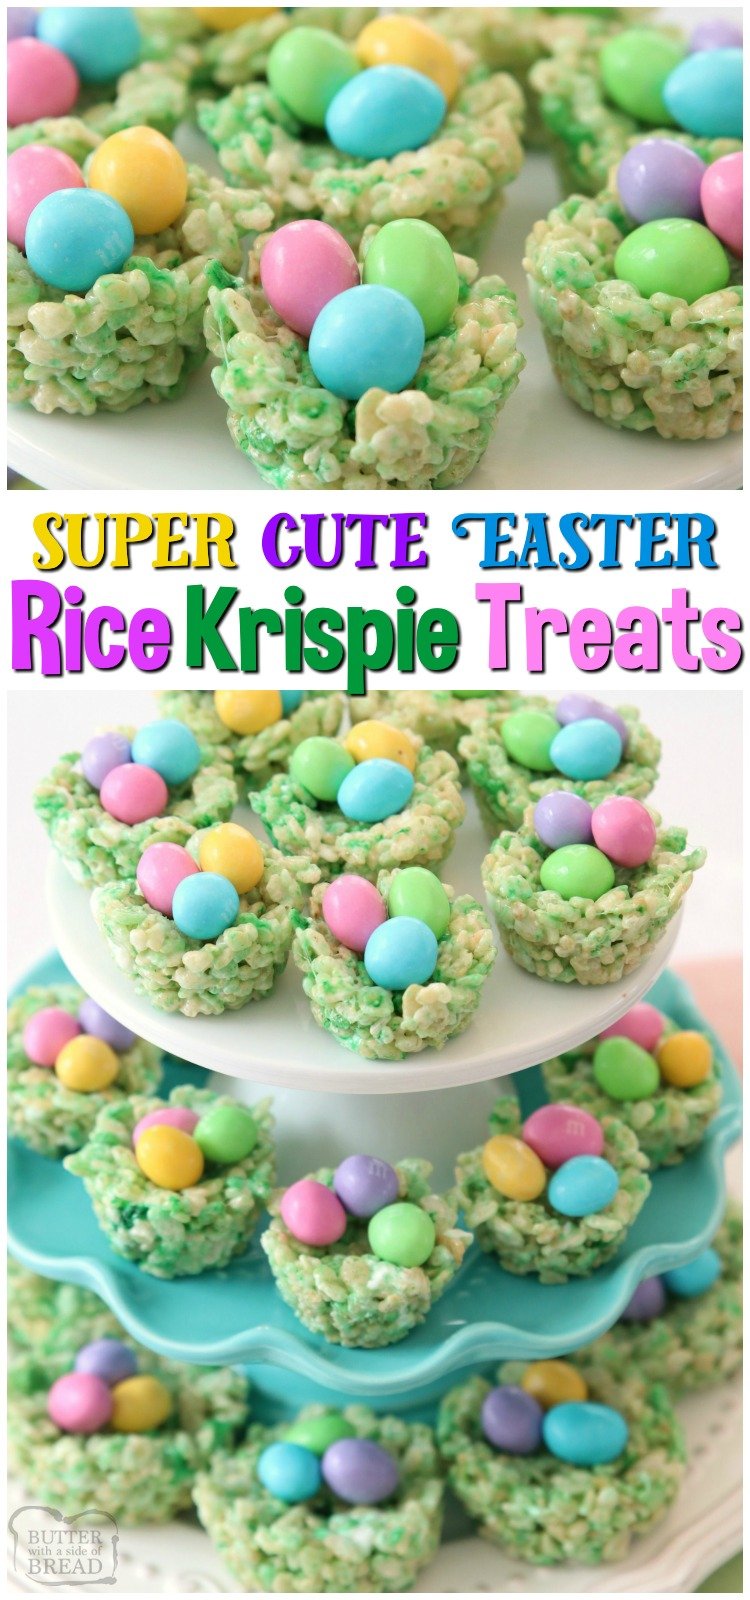 Easter Rice Krispie Treats made with classic marshmallow treat ingredients that look like cute Easter baskets! Simple, fun recipe for a festive Easter dessert. #Easter #marshmallows #krispie #treats #dessert #Spring #recipe #food from BUTTER WITH A SIDE OF BREAD